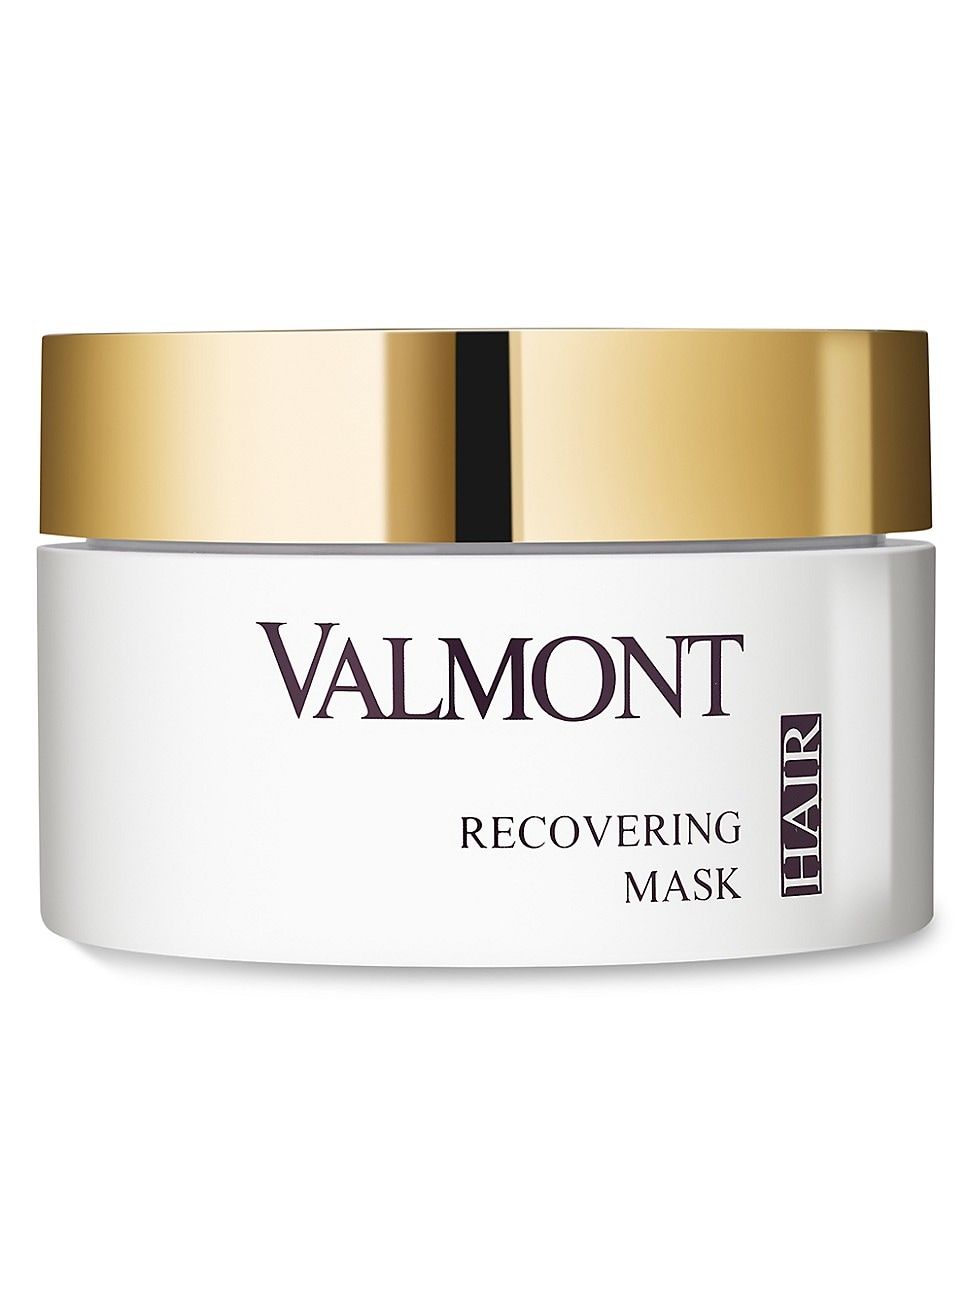 Women's Recovering Mask S. O.S Repairing Mask | Saks Fifth Avenue